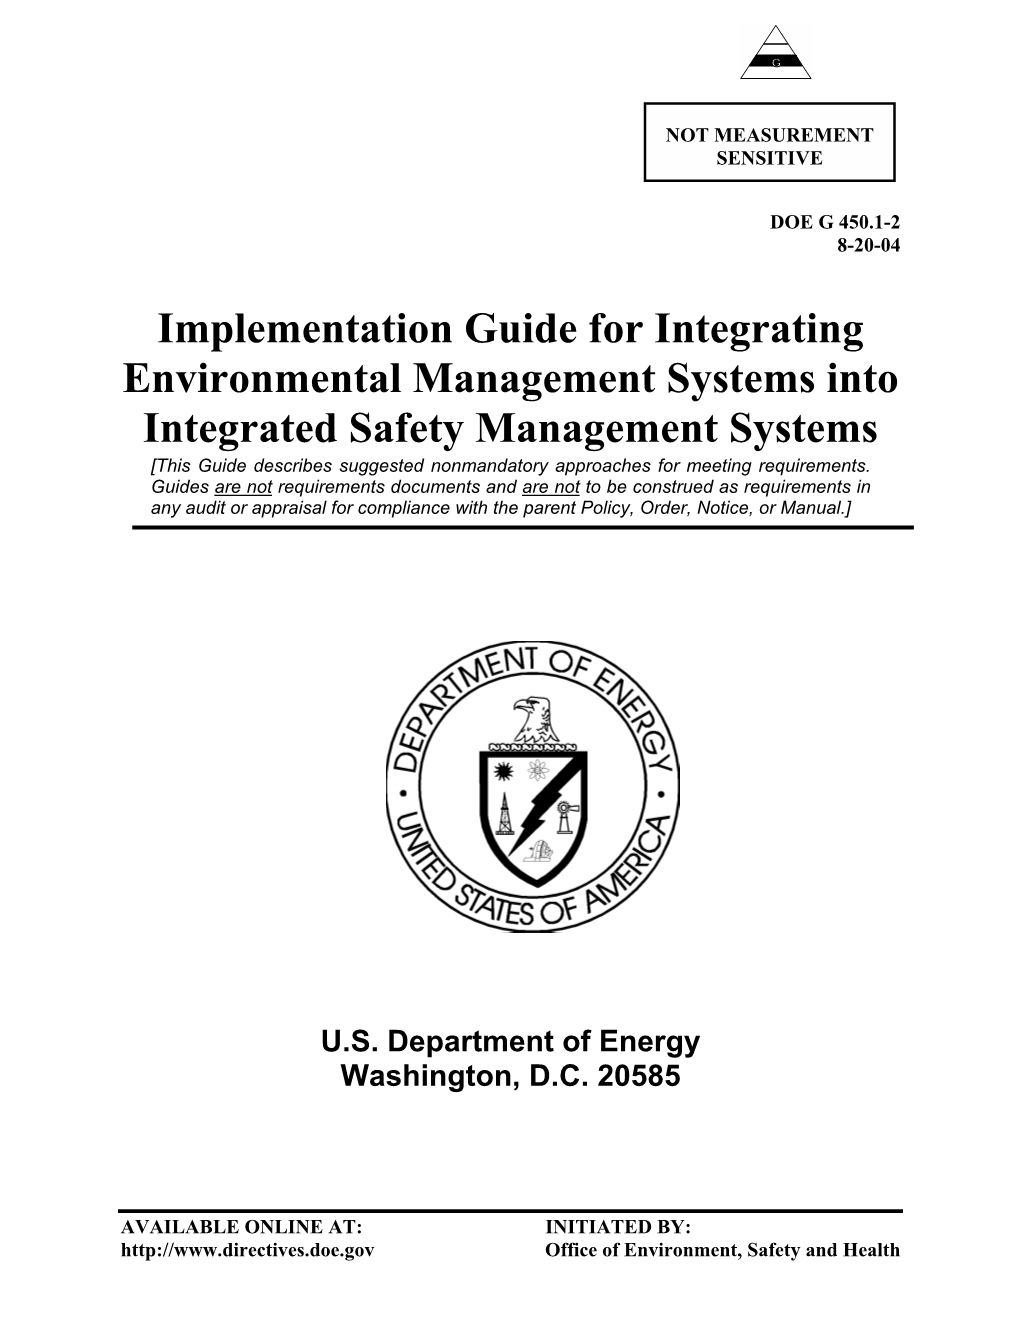 Implementation Guide for Integrating Environmental Management Systems Into